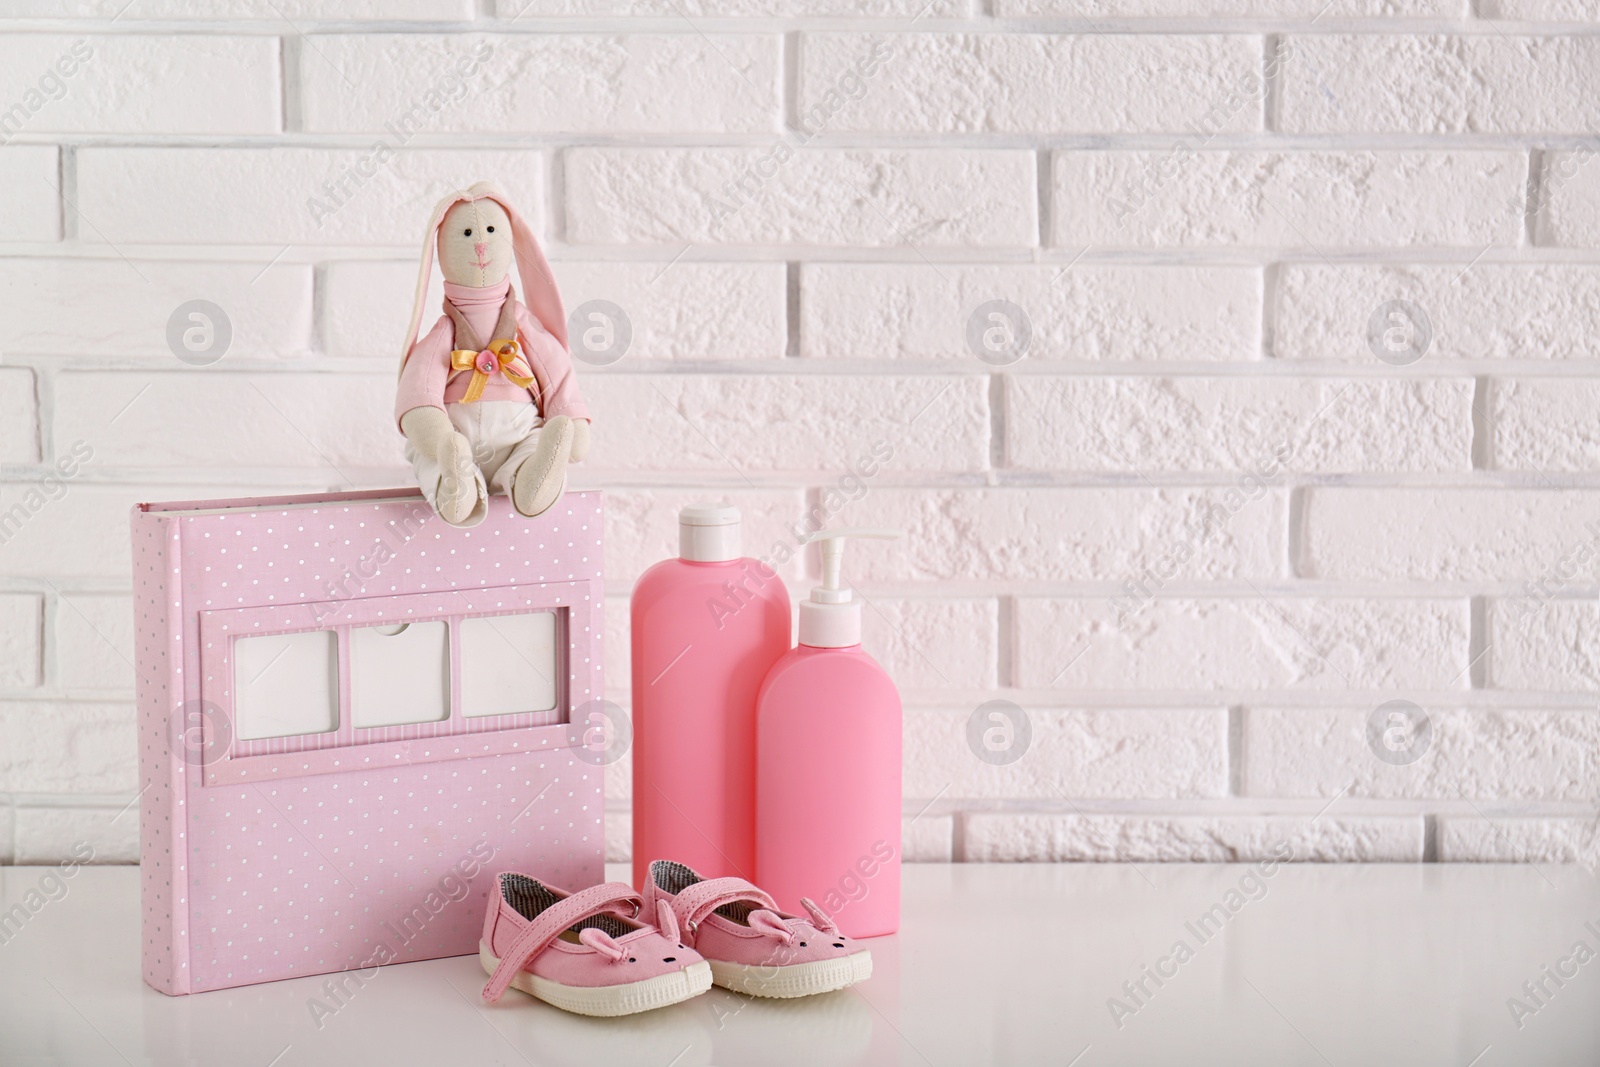 Photo of Stuffed toy with accessories for baby room interior on table near white brick wall